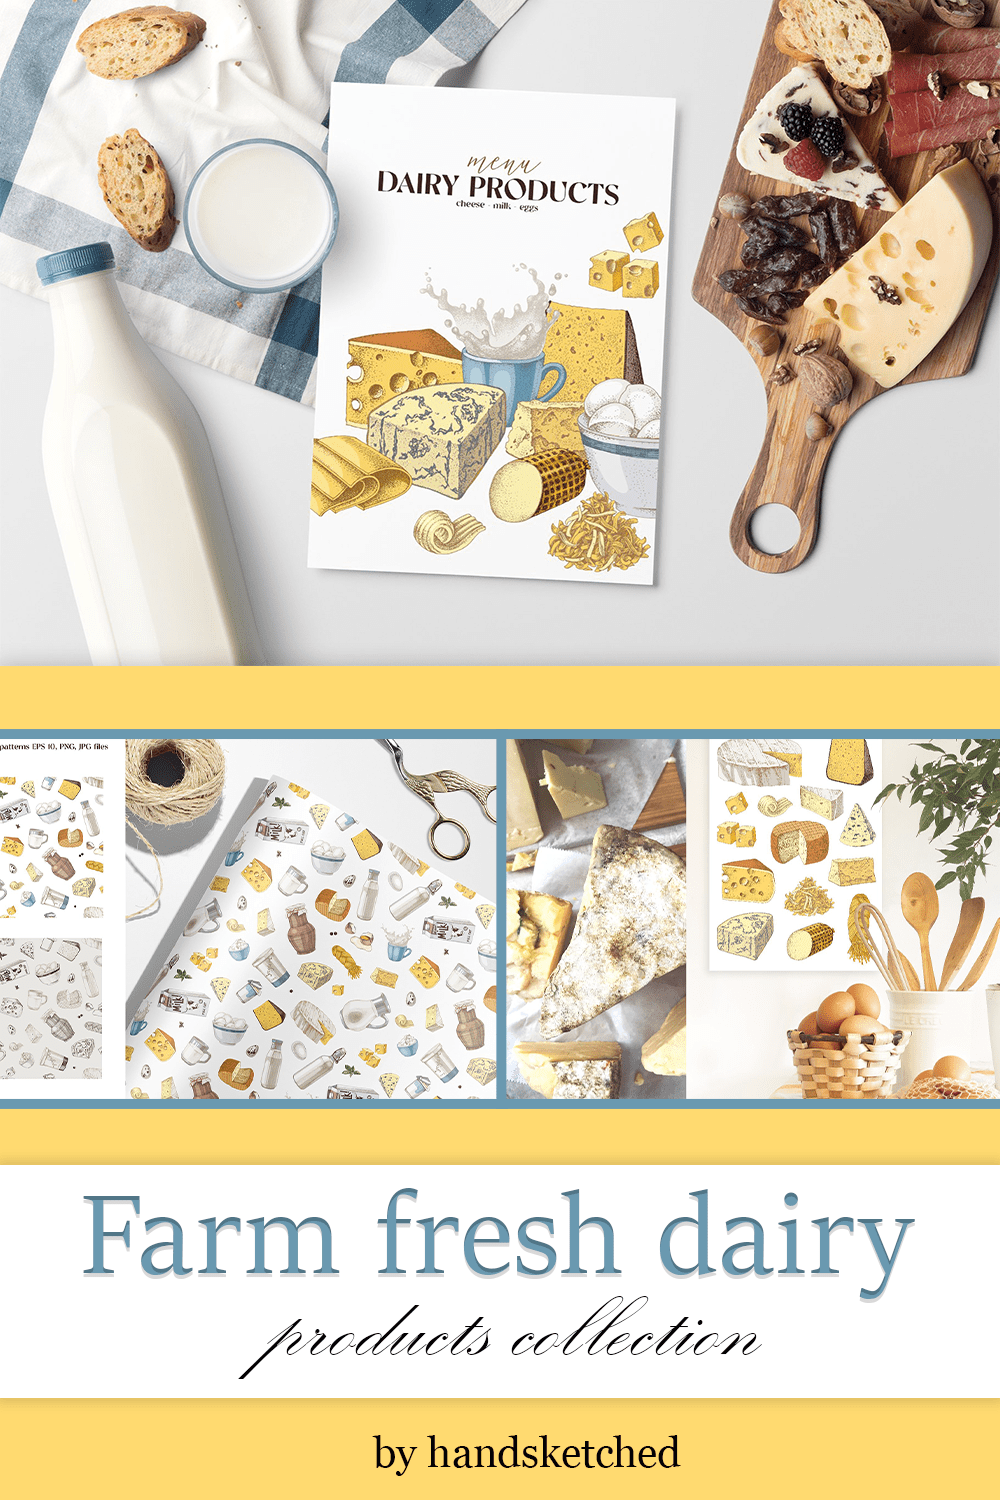 Farm fresh dairy products collection - pinterest image preview.